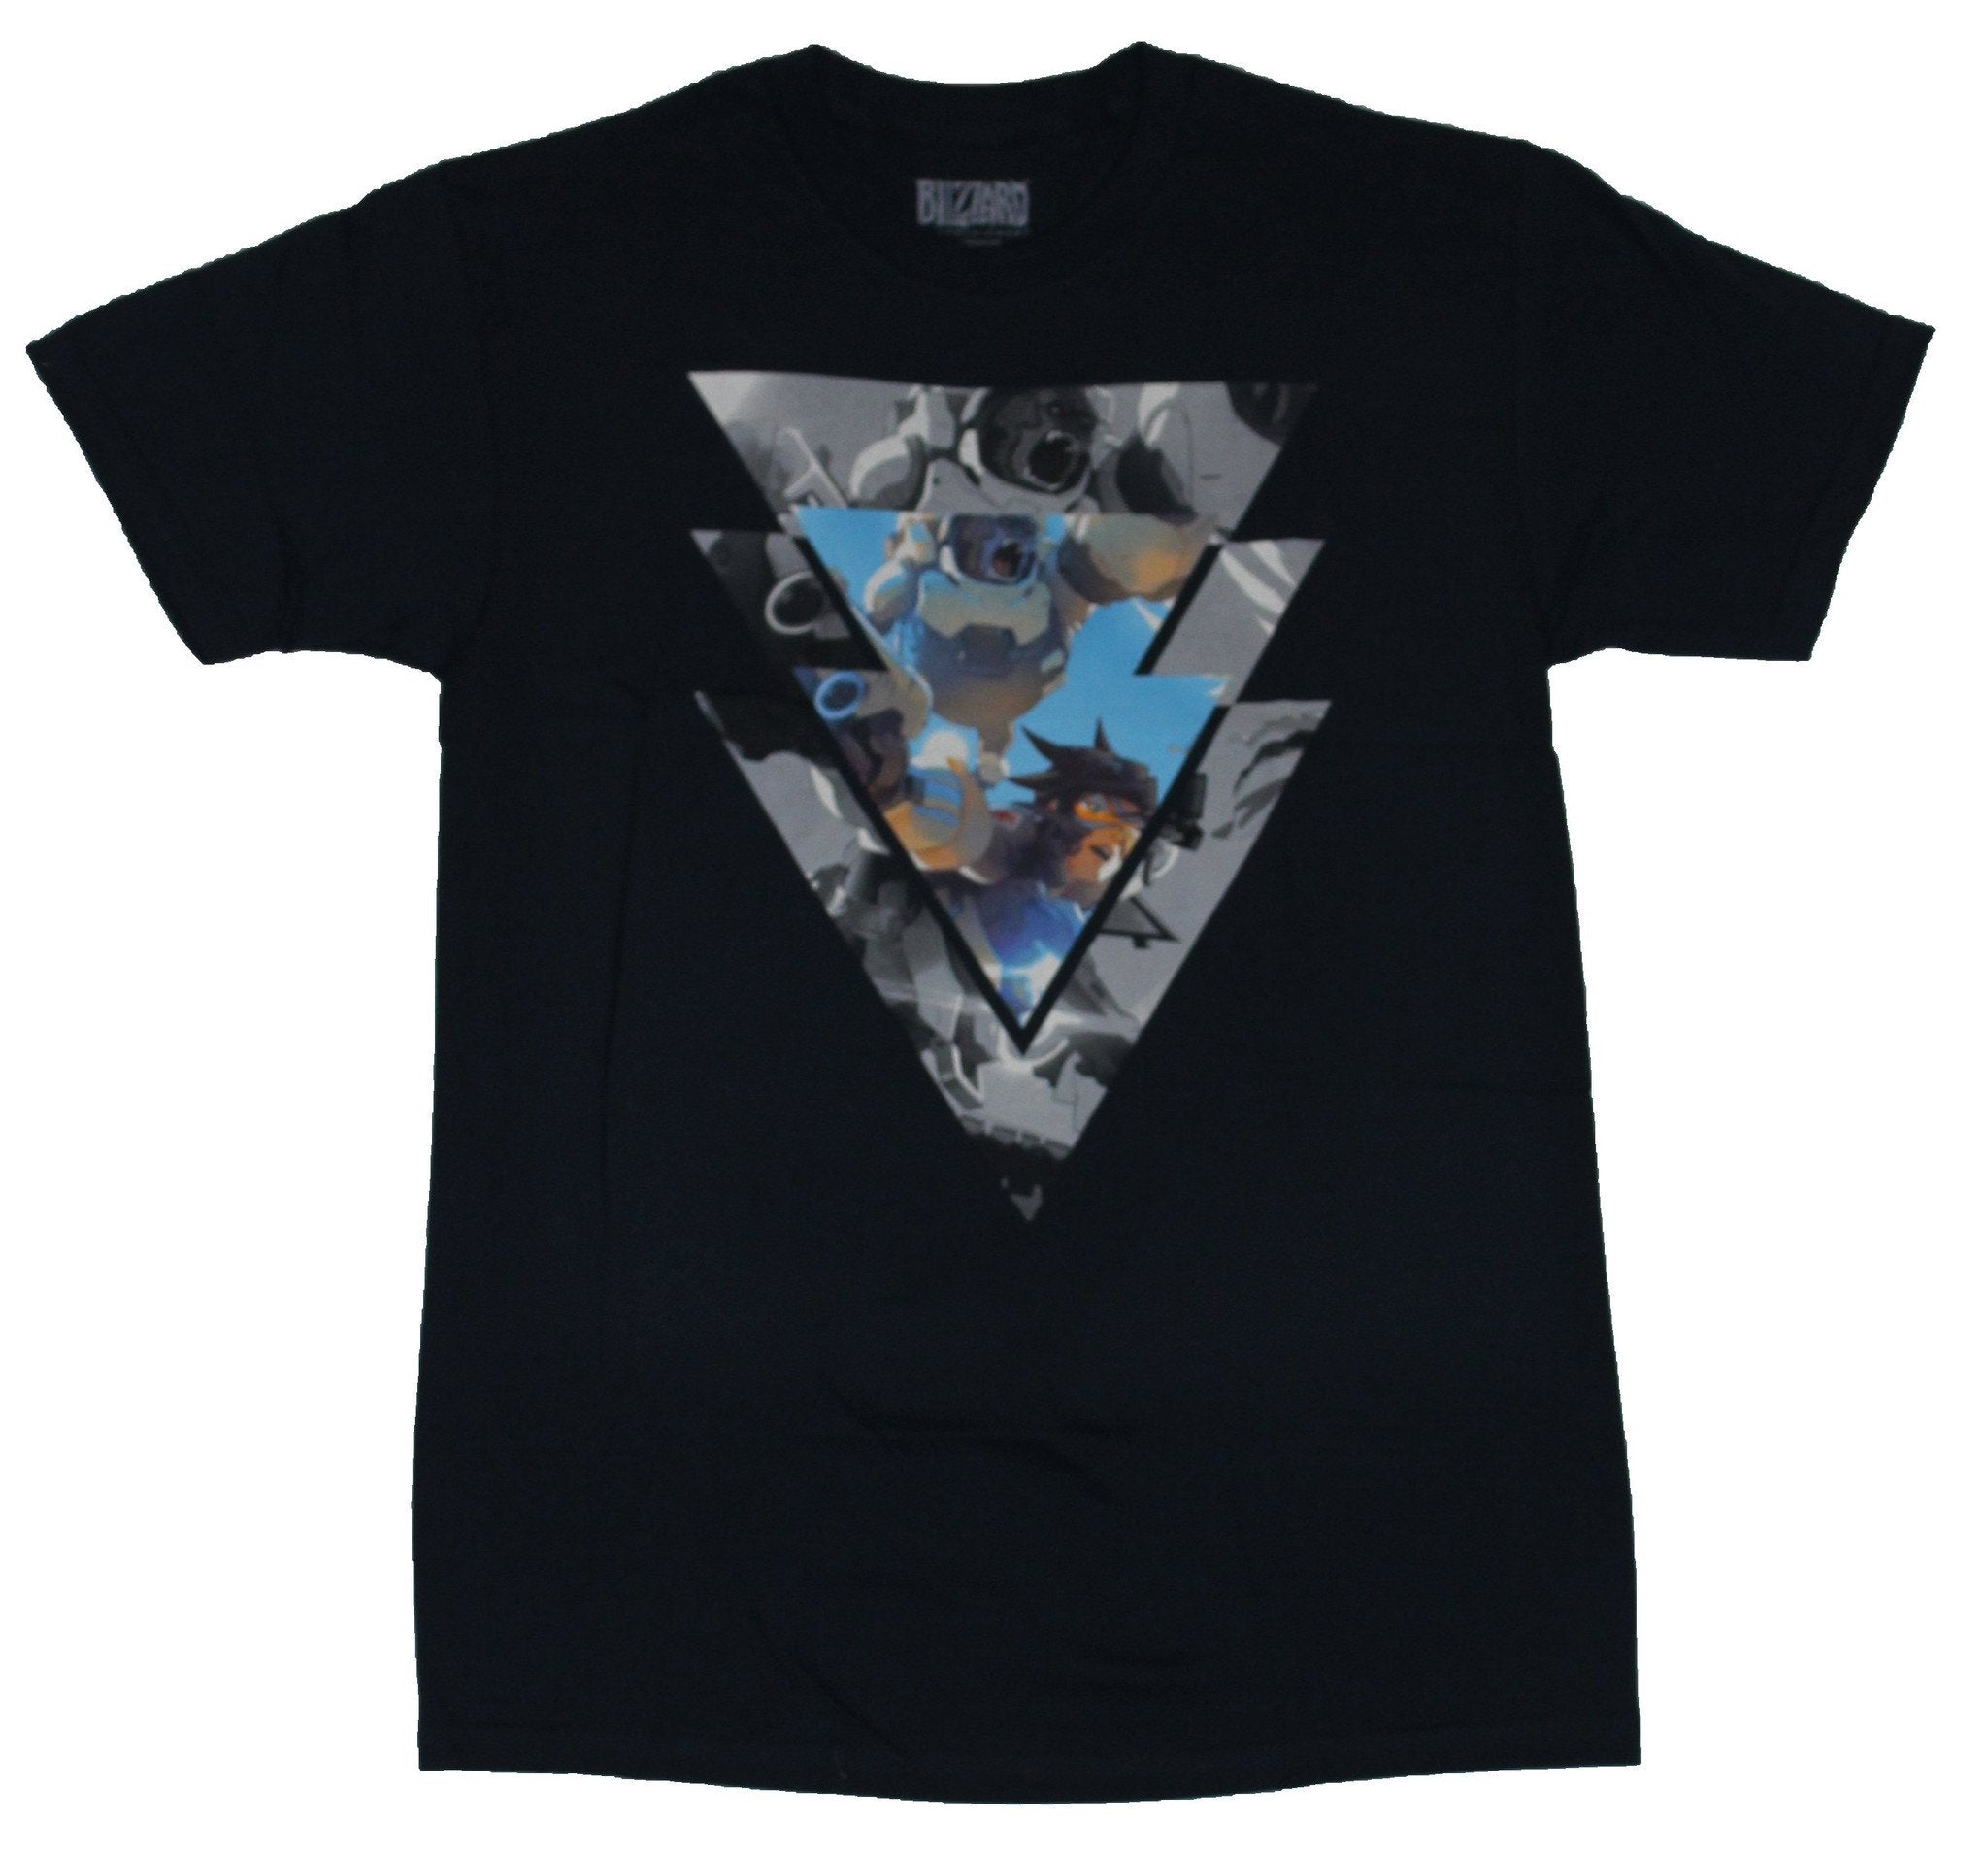 Overwatch Mens T-Shirt - For the Good Battling Triangle Game Images